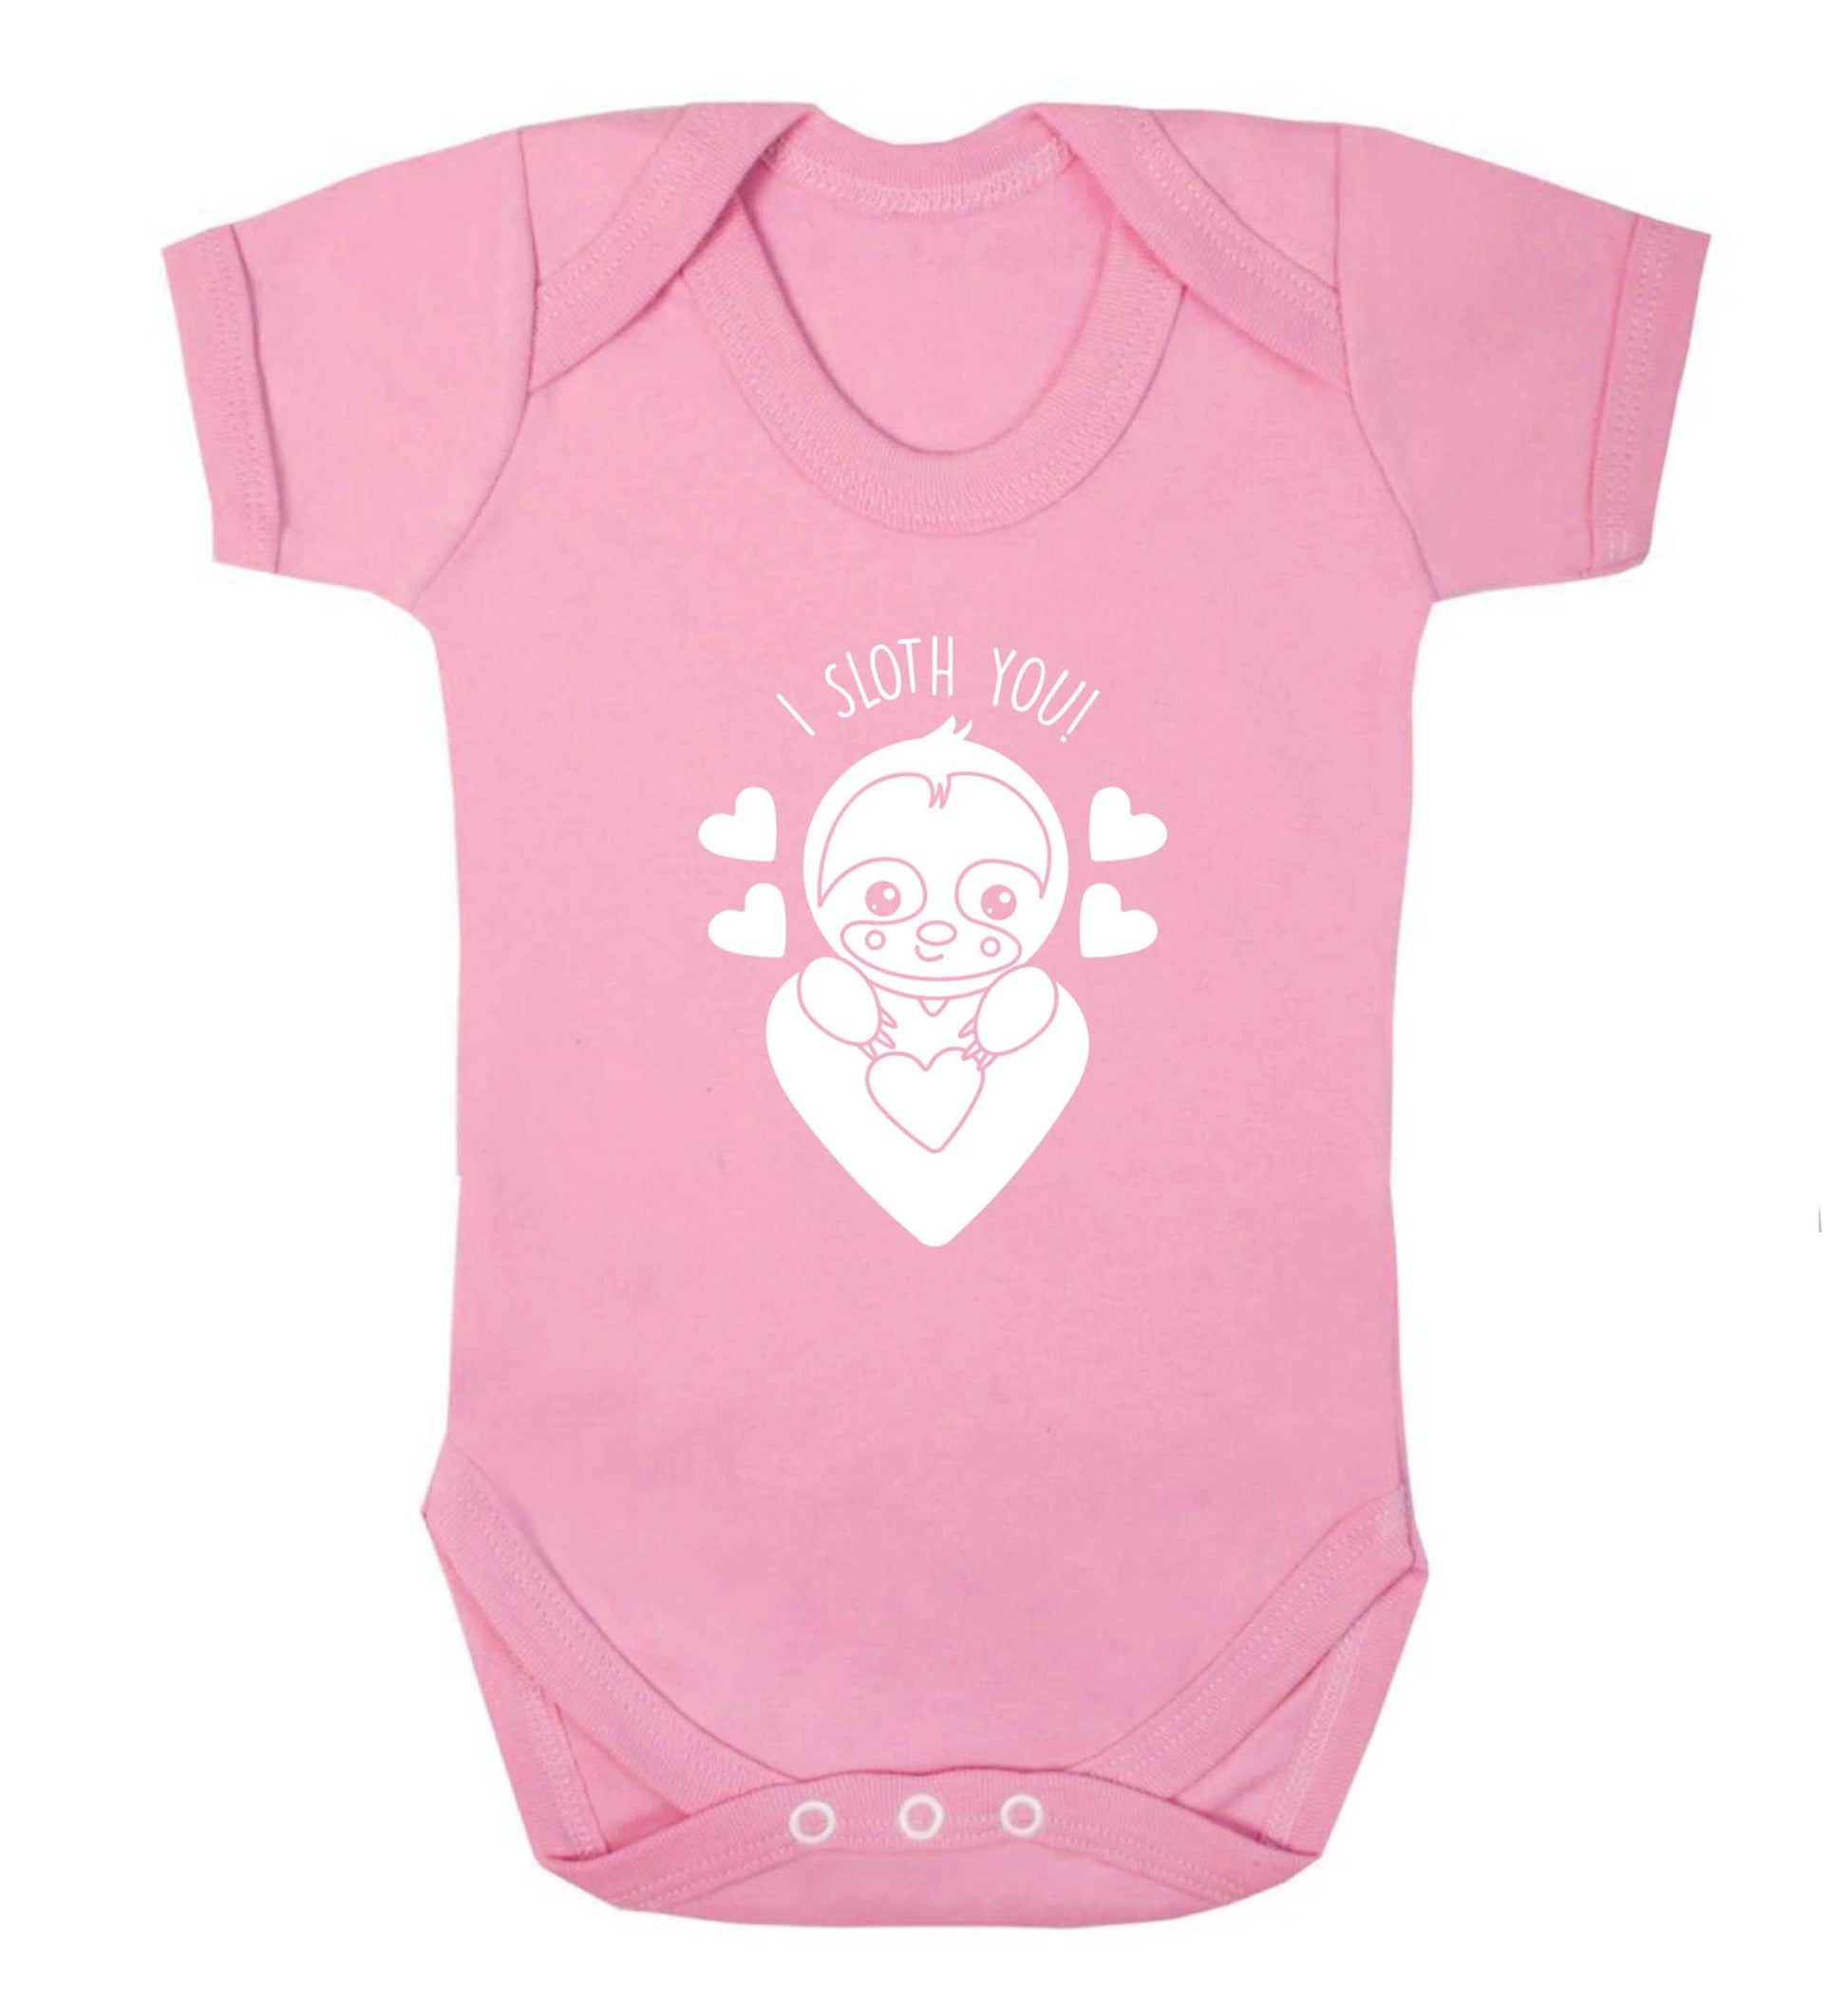 I sloth you baby vest pale pink 18-24 months